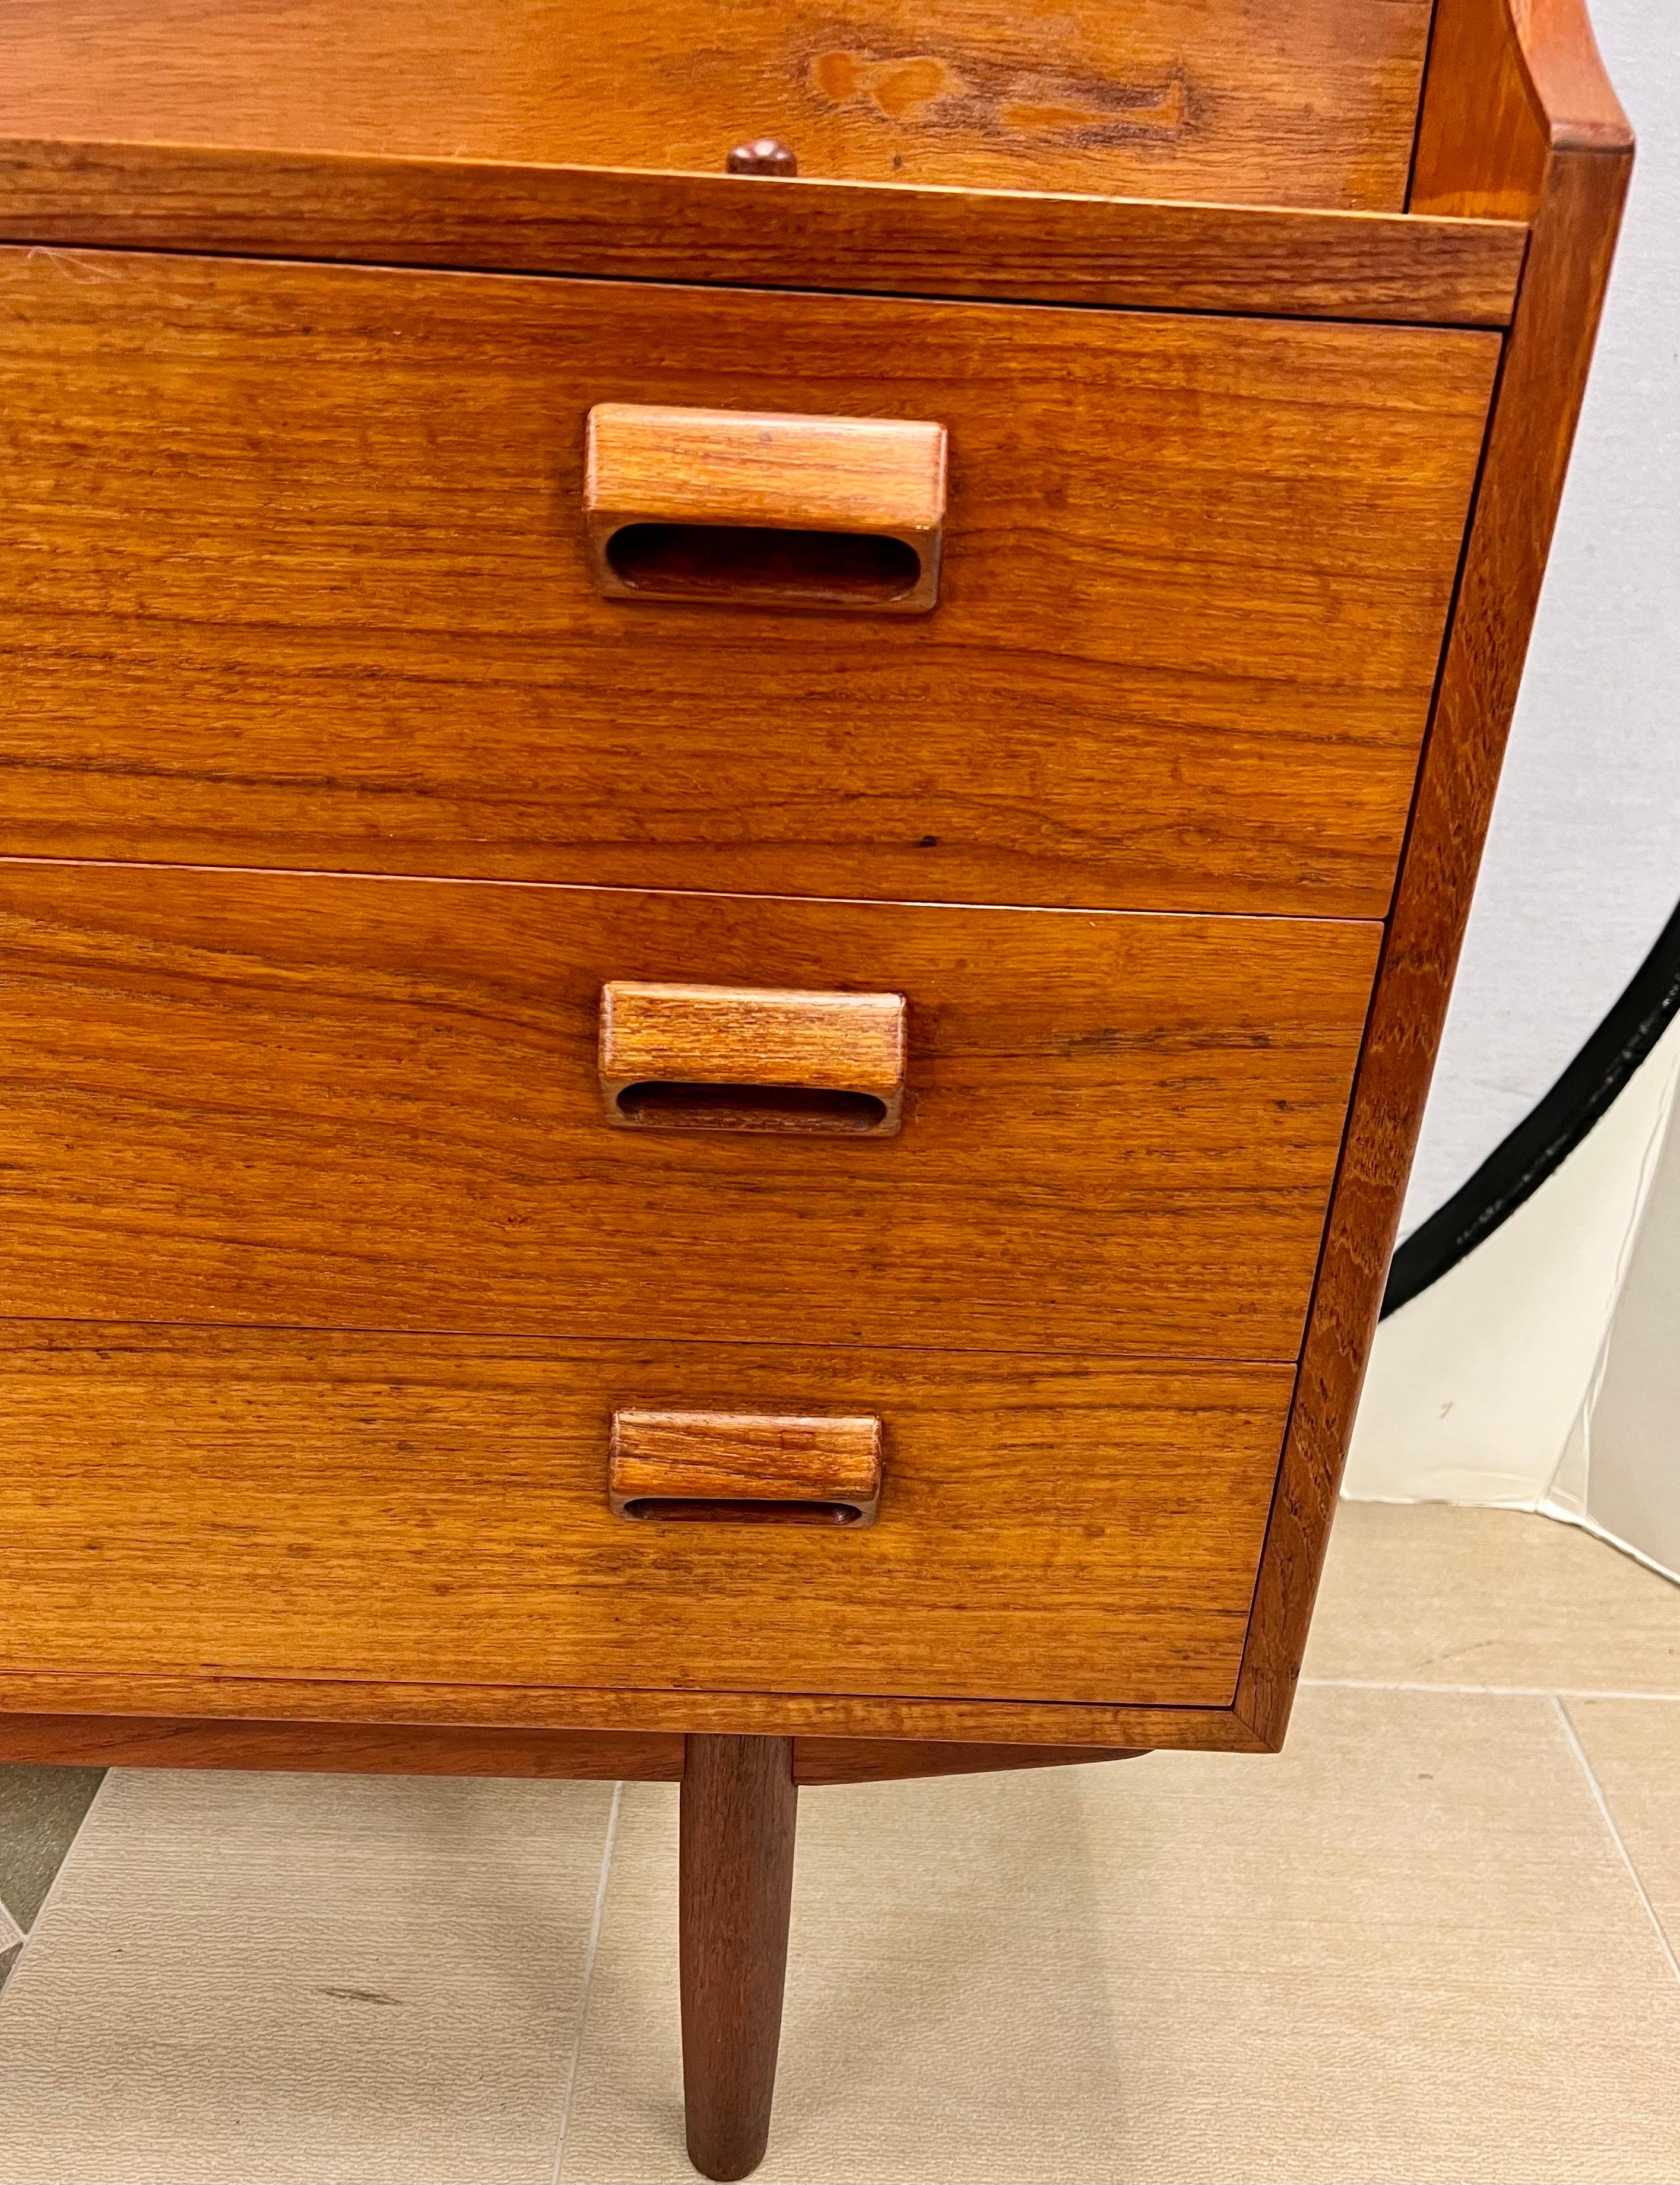 Mid century Borge Morgensen teak secretary desk is part desk, part storage. Bottom part has three drawers. Top leaf drops down into a writing surface. Multifunctional and elegant, this desk can serve as both a desk and an entryway piece. Great